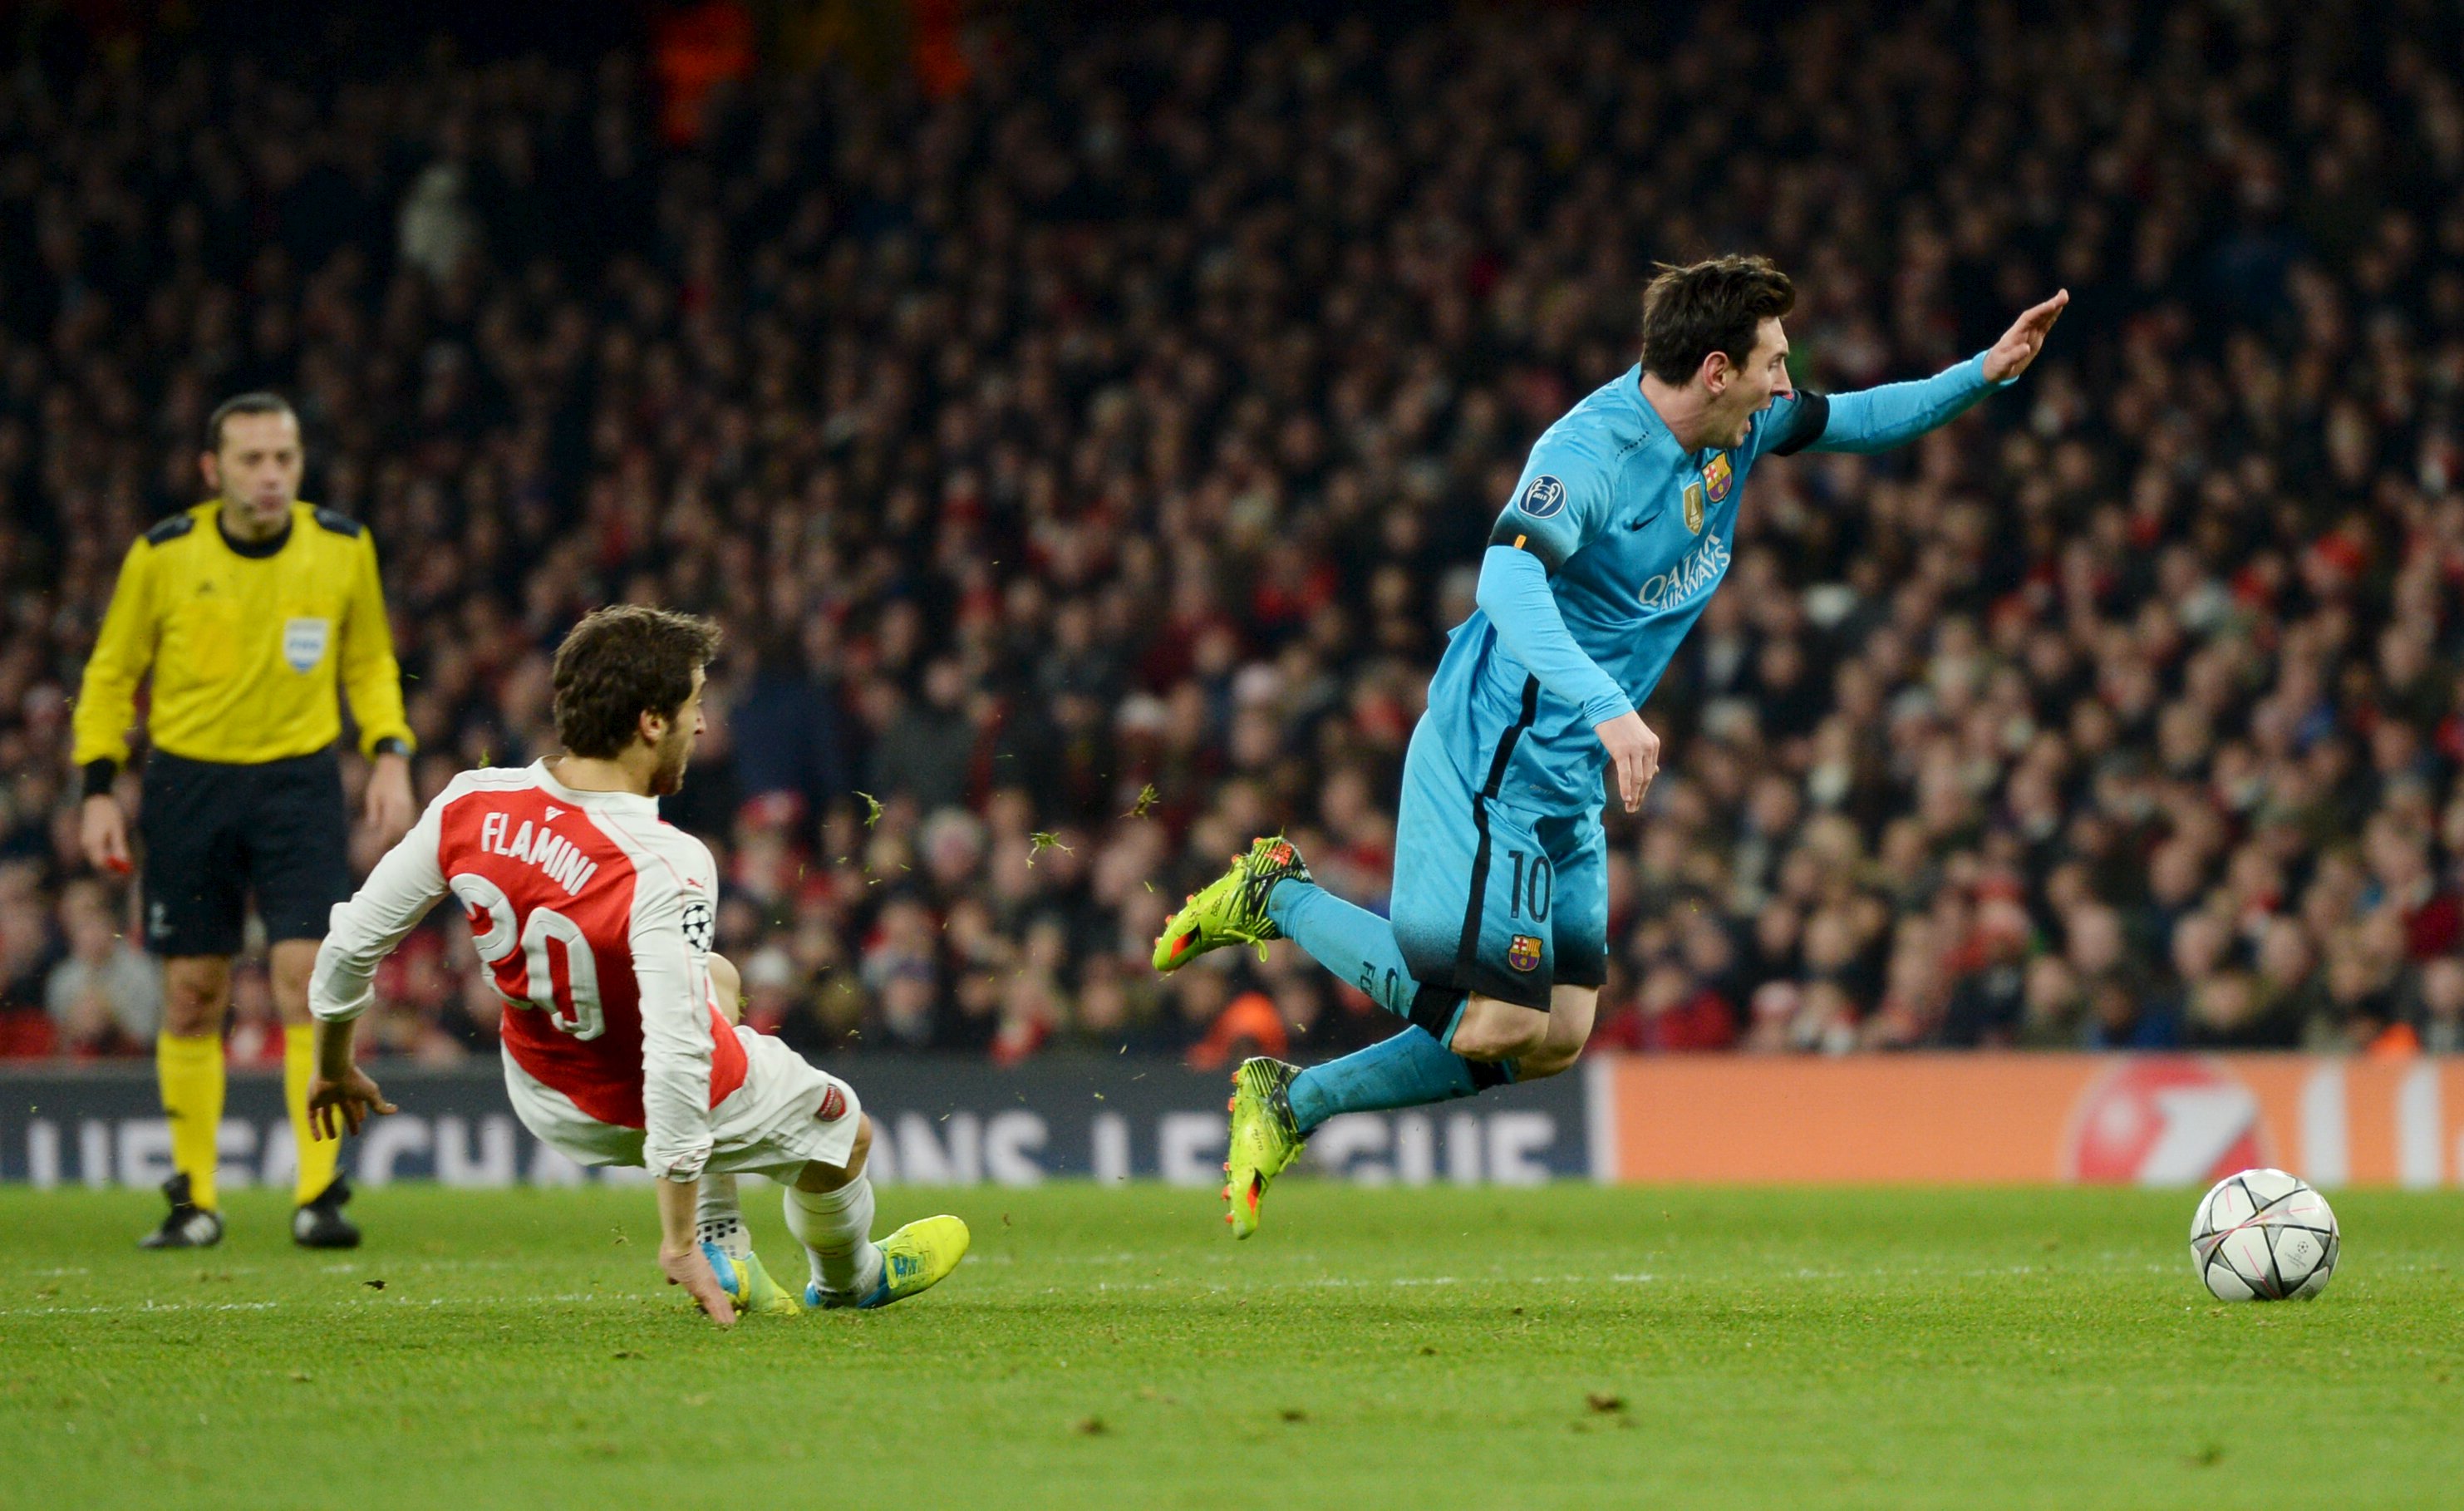 Lionel Messi picks up a penalty after being fouled by Arsenal's Mathieu Flamini. Photo: Reuters